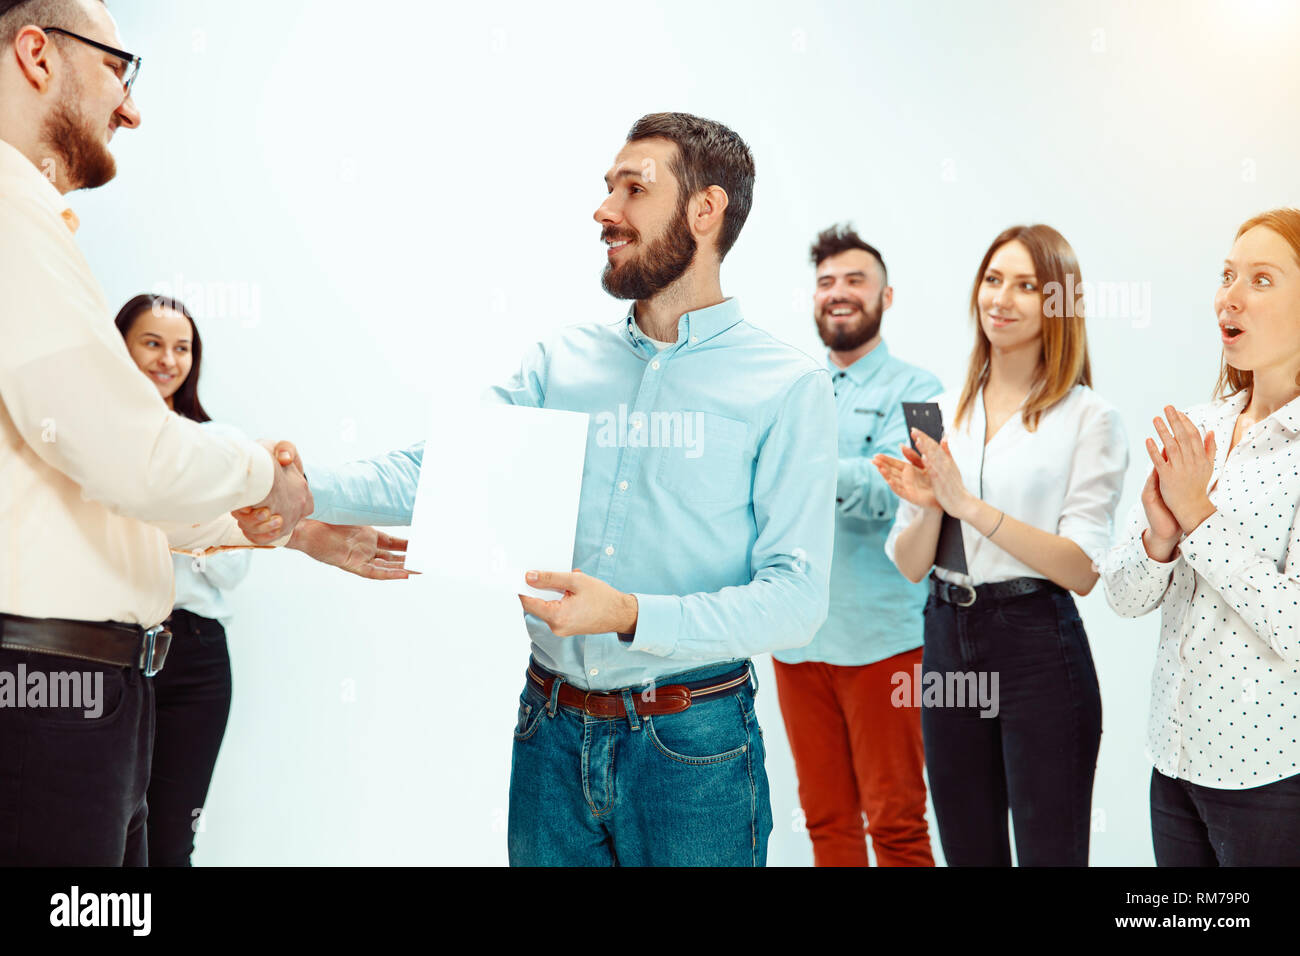 Boss approving and congratulating young successful employee of the company for his successes and good work. National Employee Appreciation Day, businesswoman, businessman, business, success, admire, career growth concept. Stock Photo